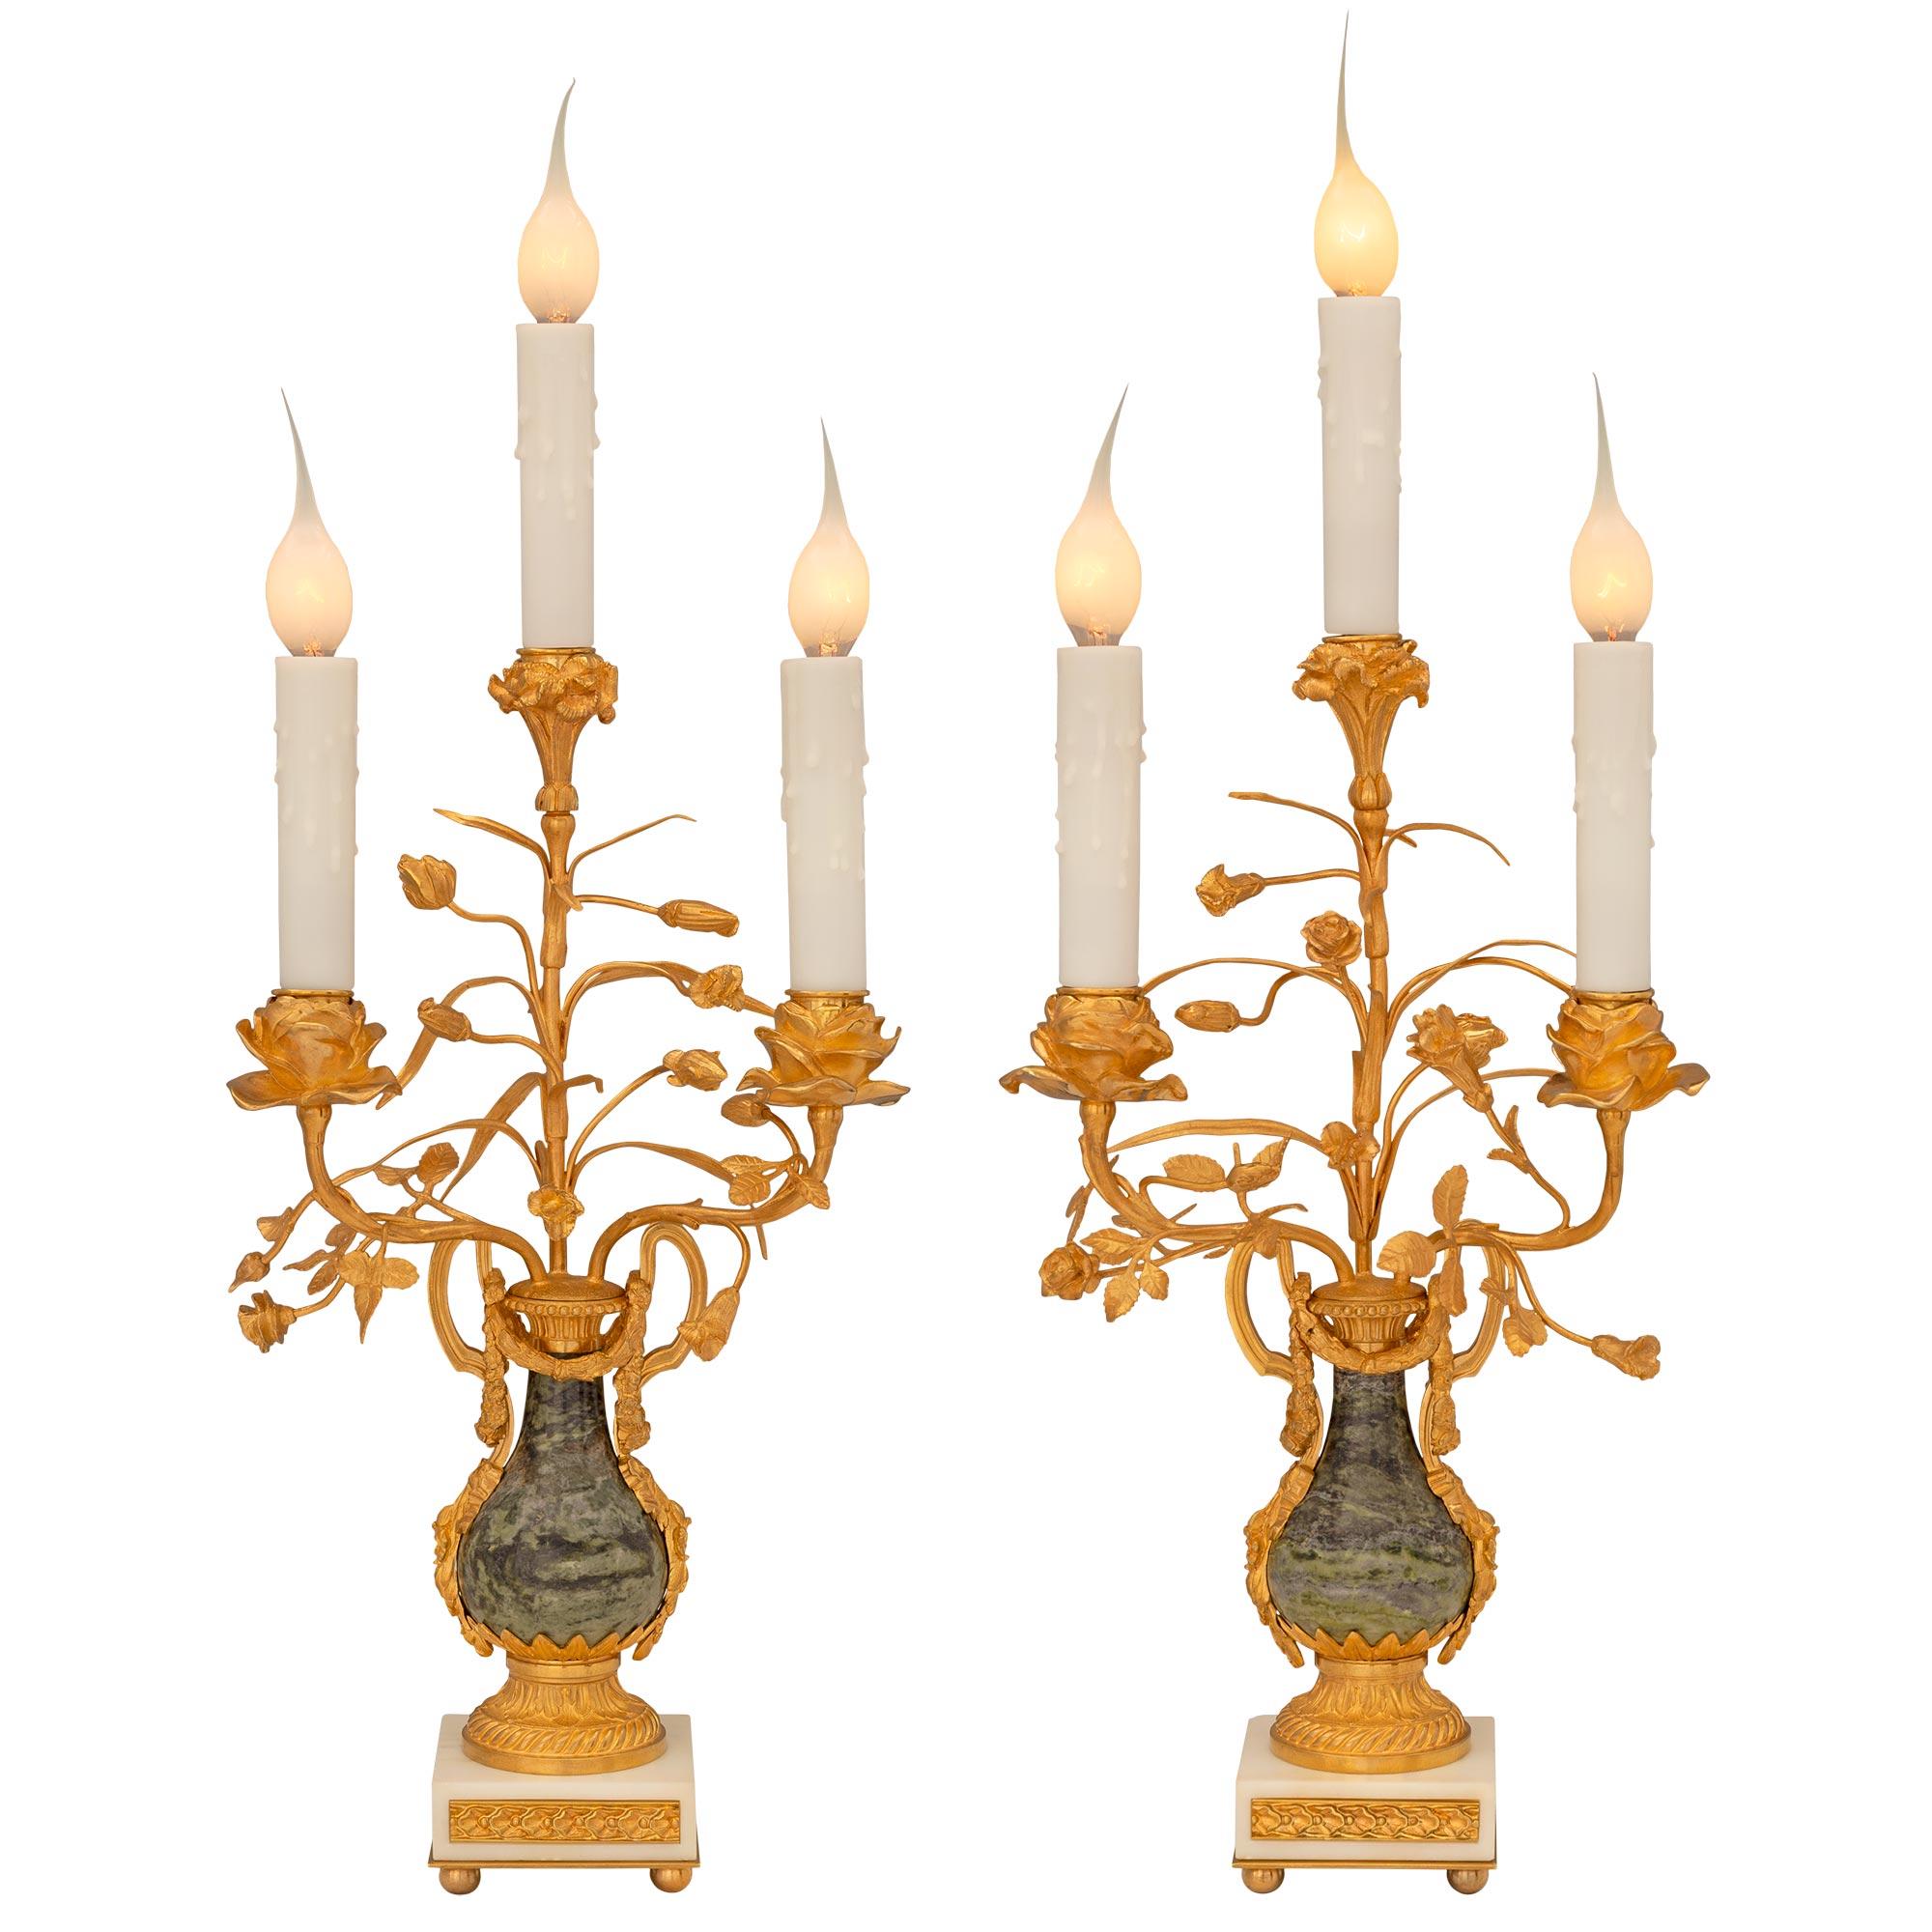 A striking and high quality pair of French 19th century Louis XVI st. ormolu and marble candelabra lamps. Each three arm lamp is raised by an elegant square white Carrara marble base with fine ormolu ball feet and a fitted foliate ormolu plaque at